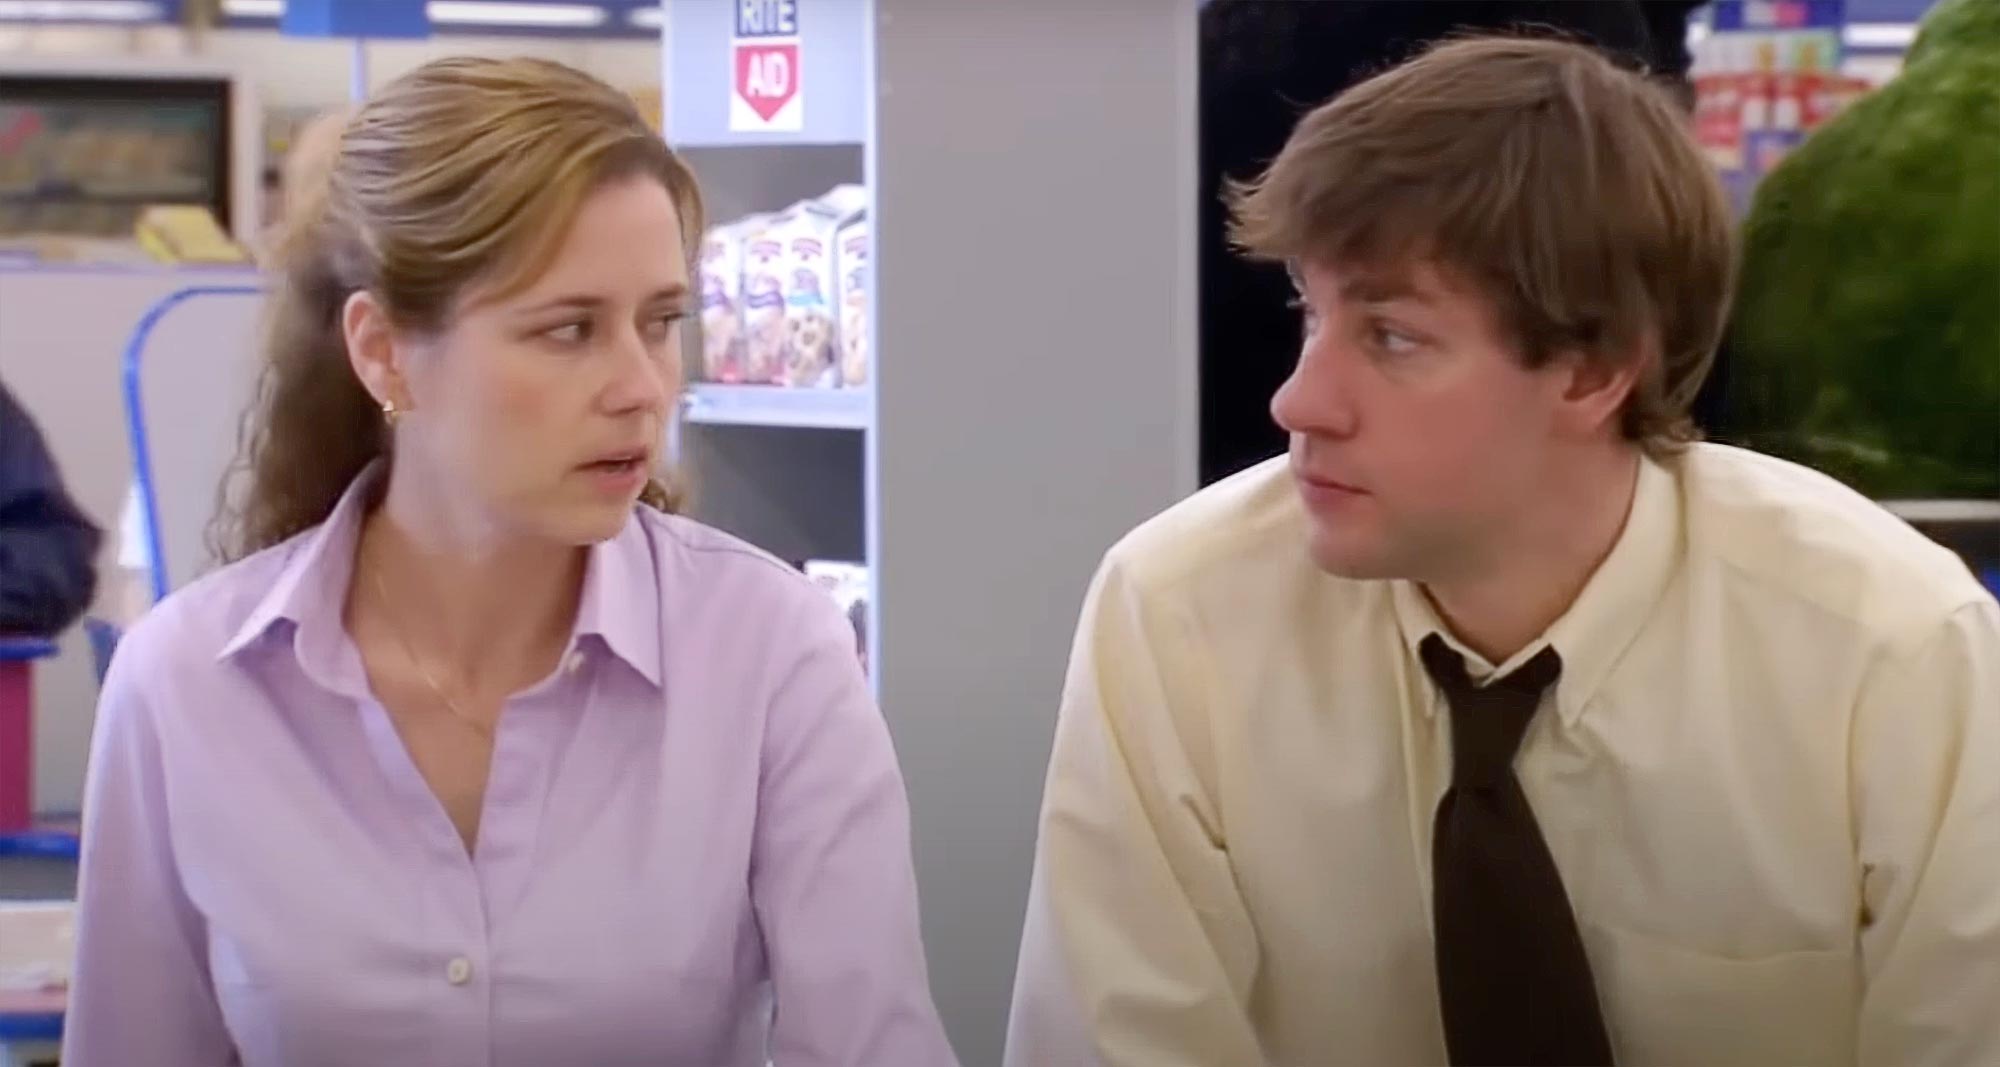 The Office'': Jim and Pam get outed